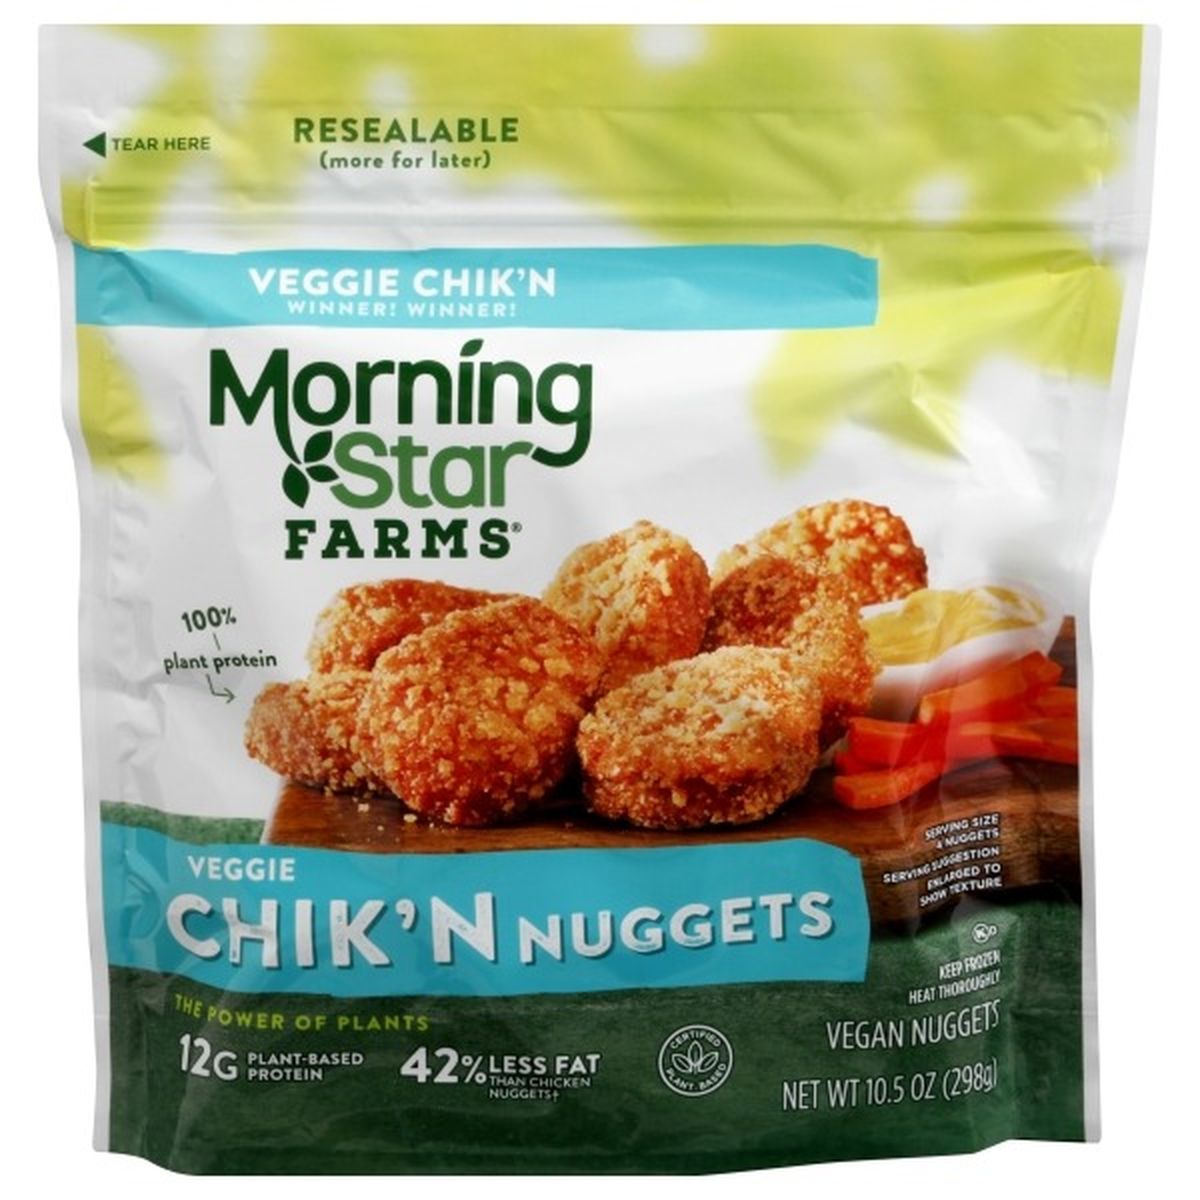 Calories in Morning Star Farms Veggie Nuggets, Chik'n